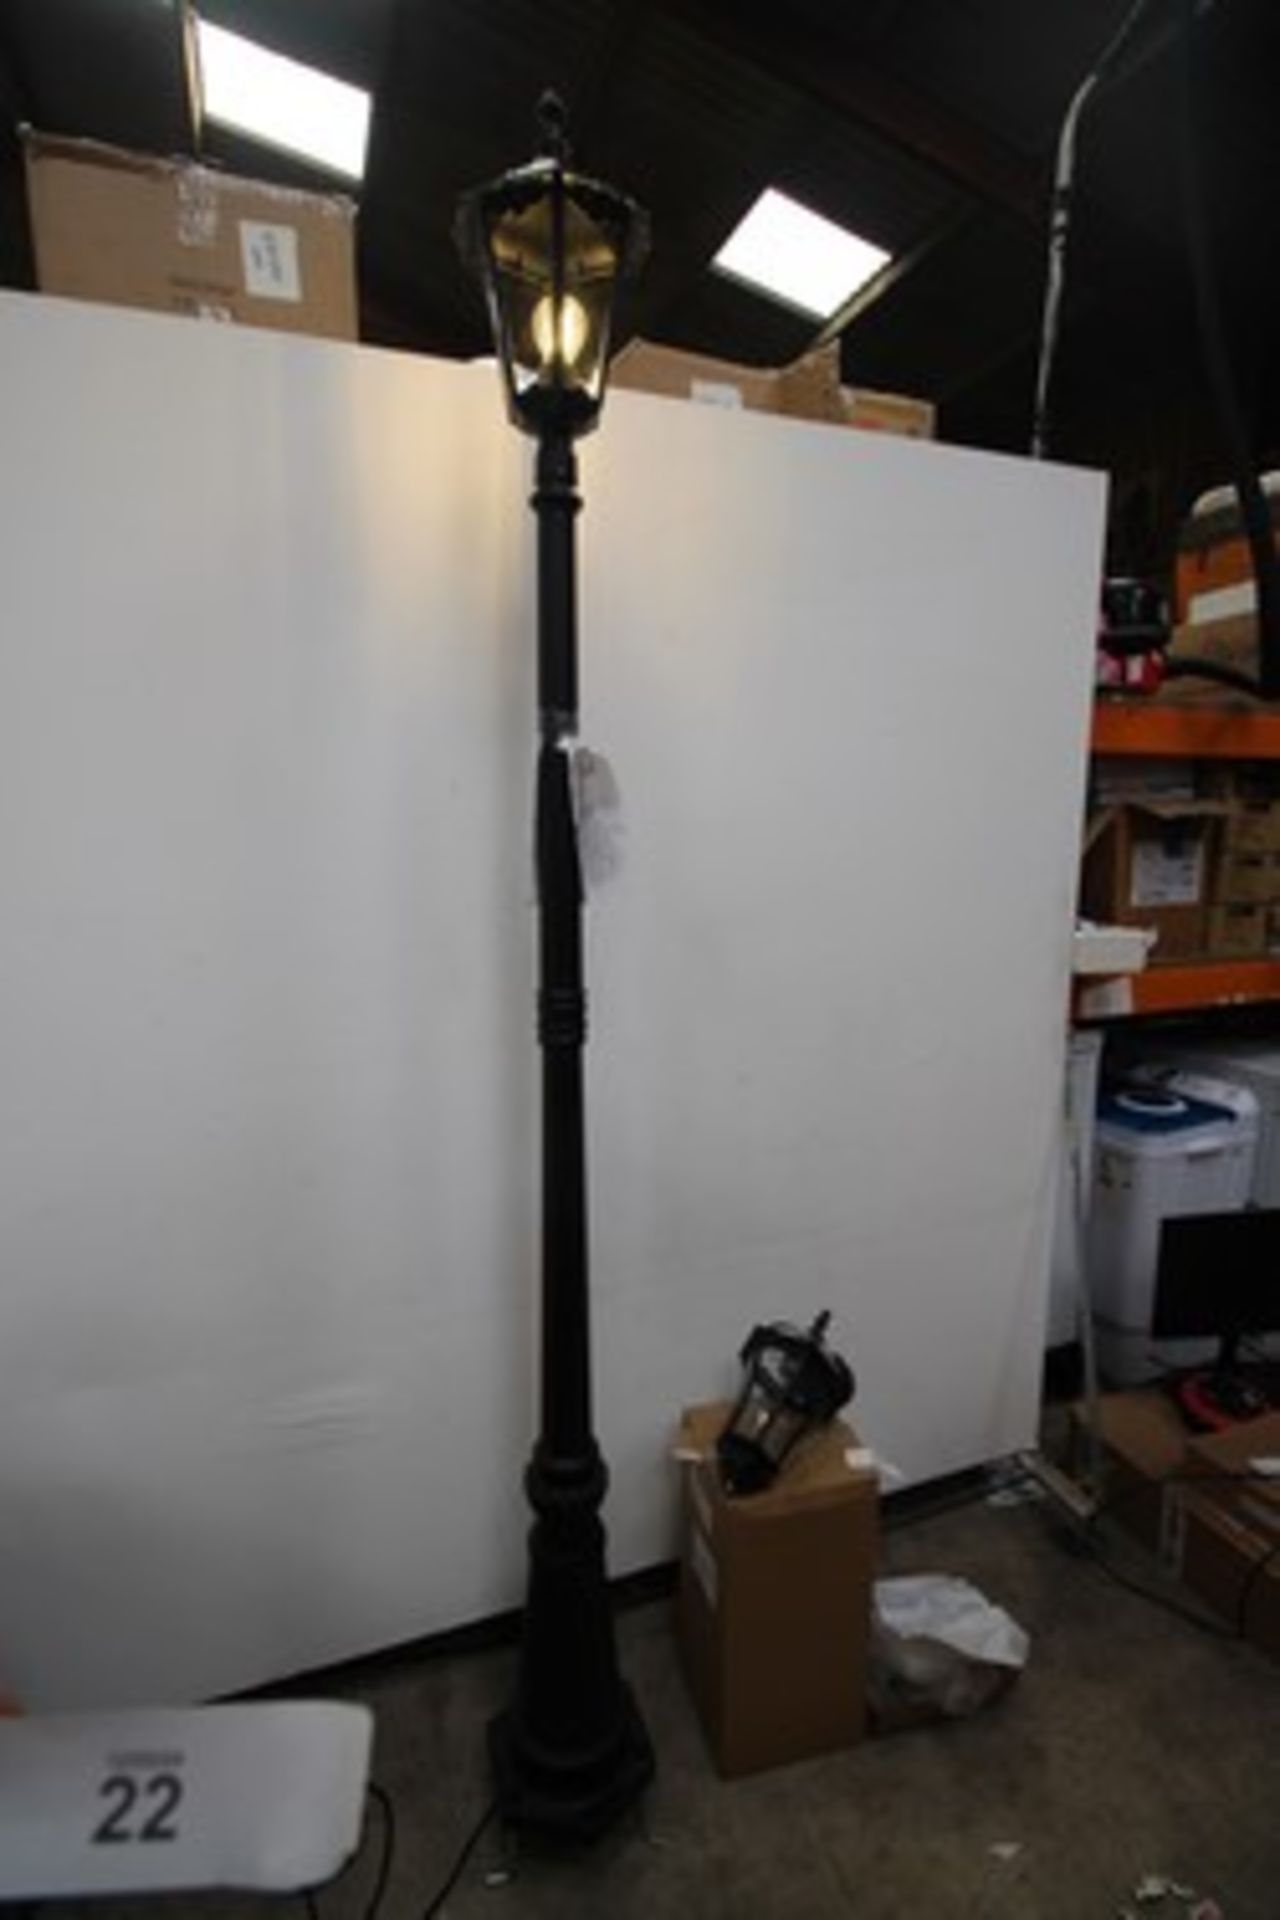 1 x Endon Burford metal lamp post with LED lamp, model: 76551, together with 1 x Drayton